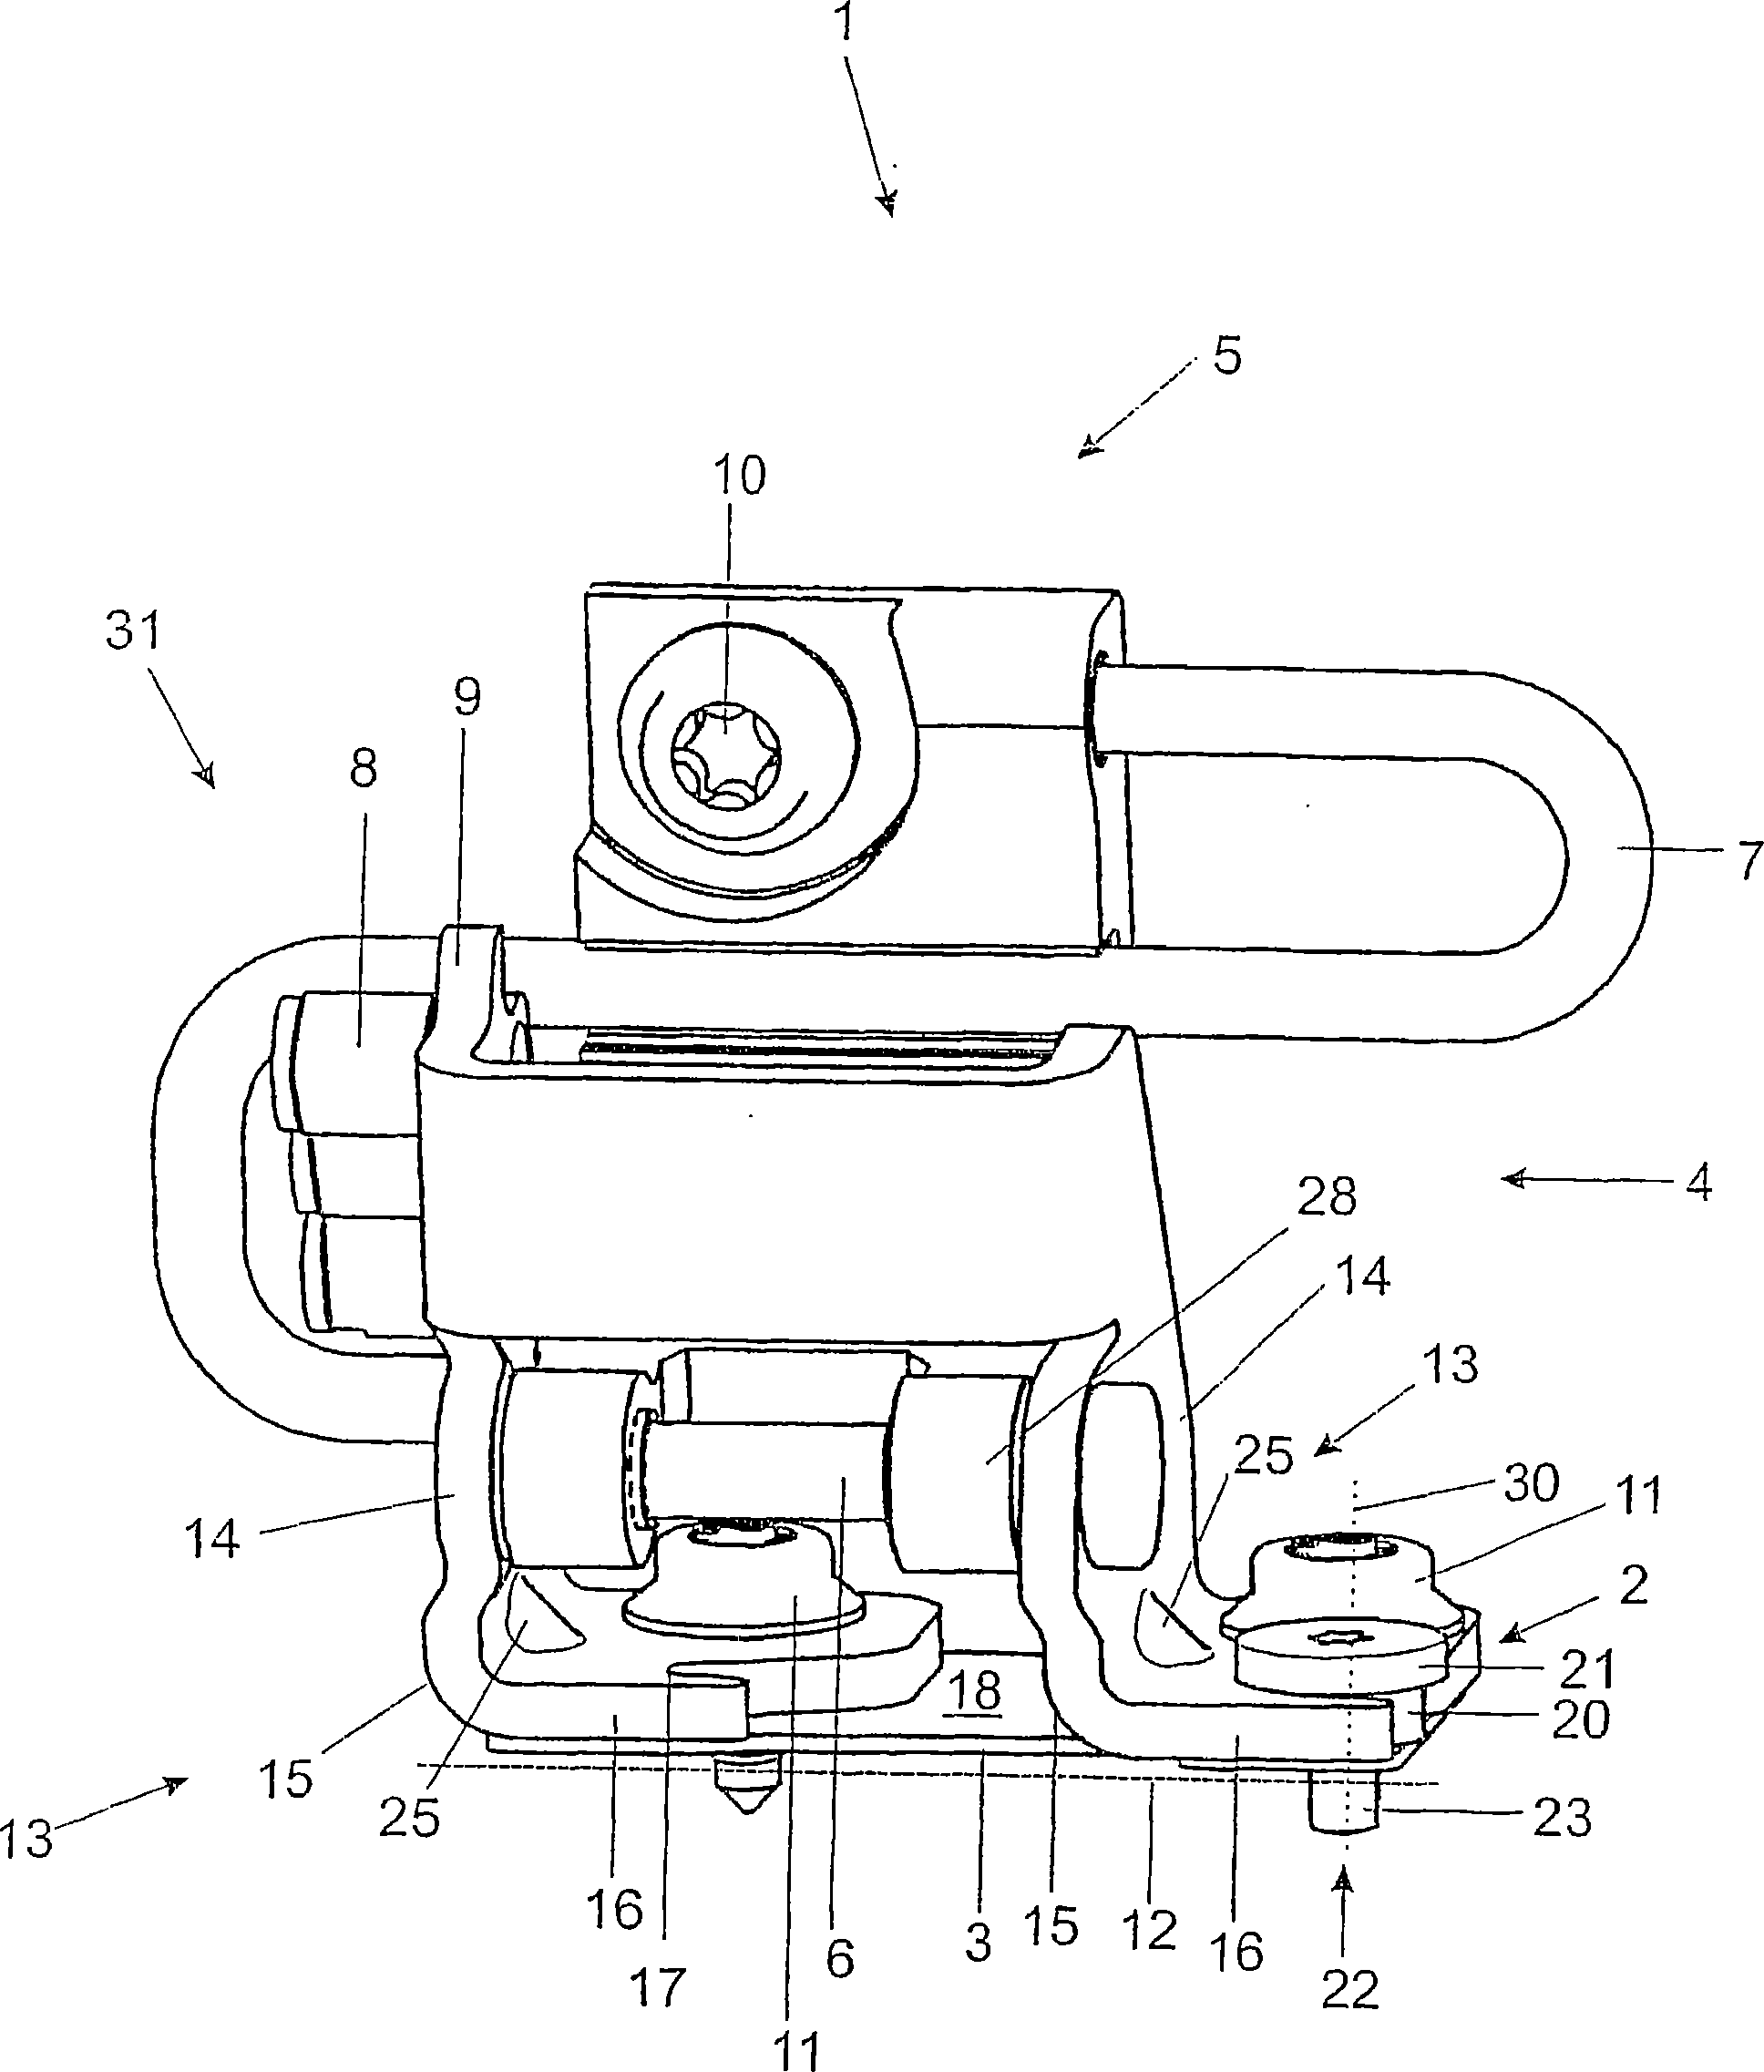 Assembly aid and method for positioning a hinge in a reproducible manner